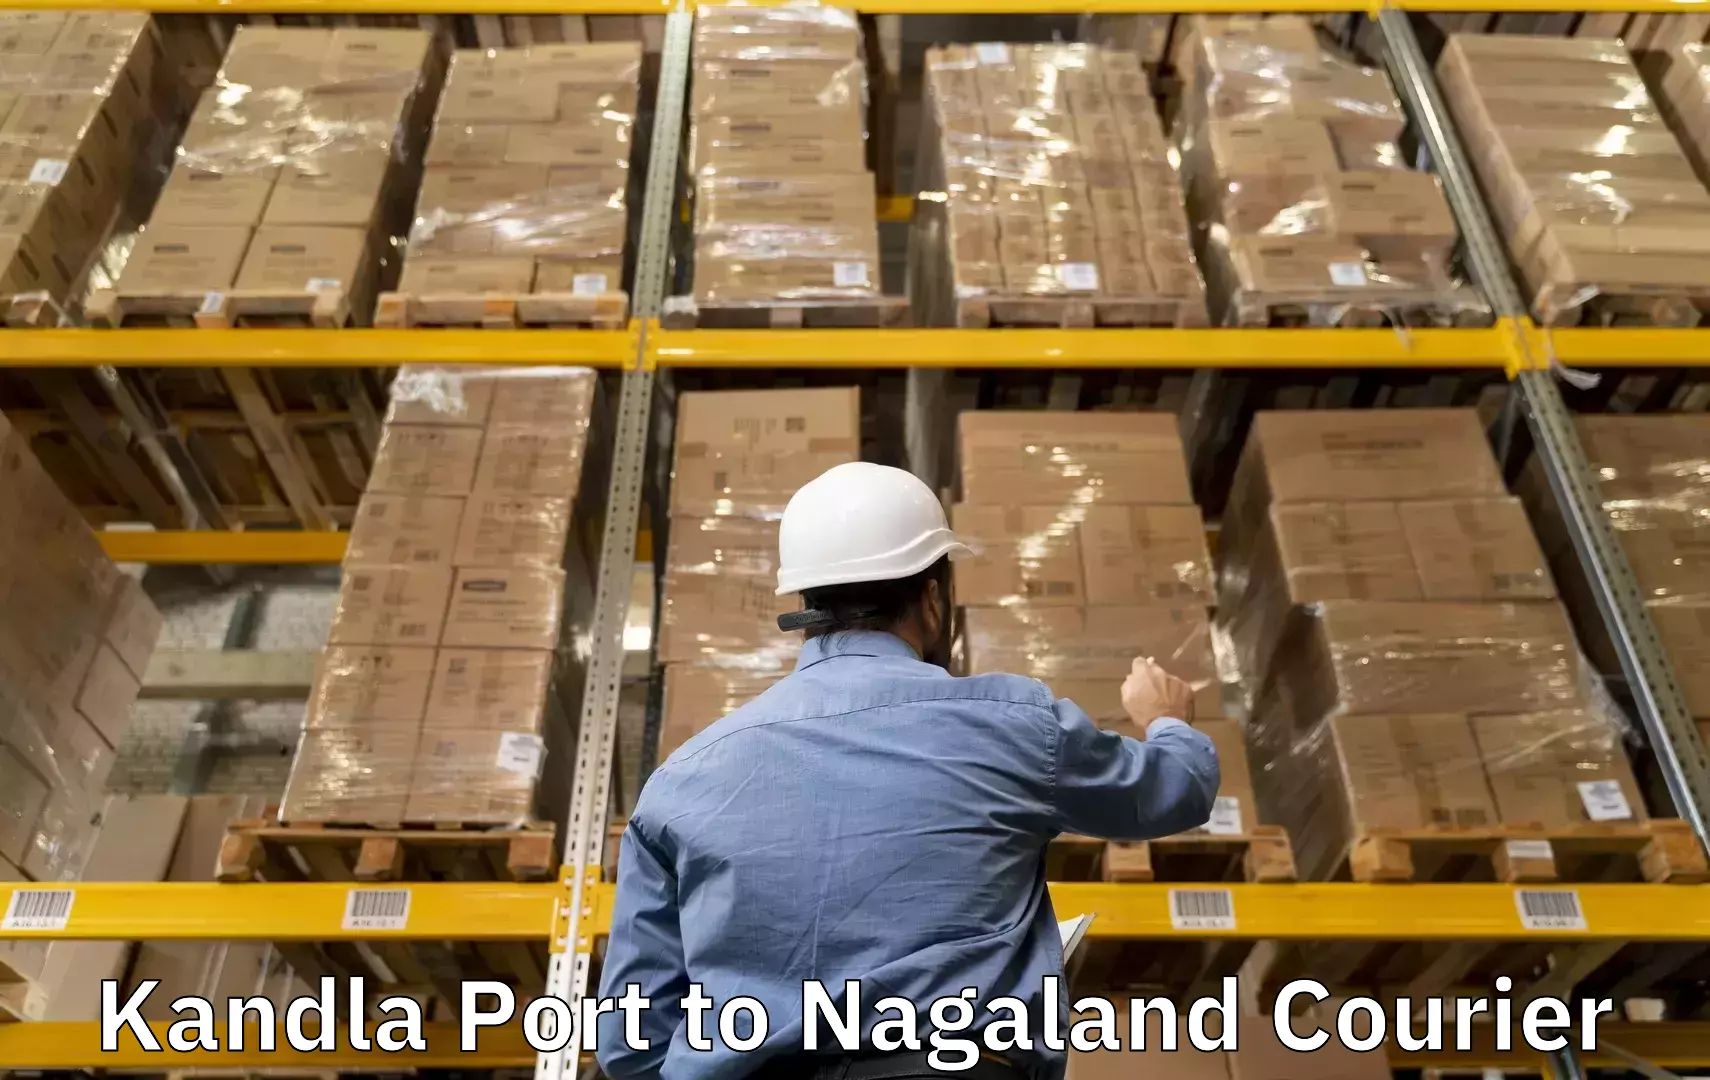 Luggage shipping planner in Kandla Port to Nagaland